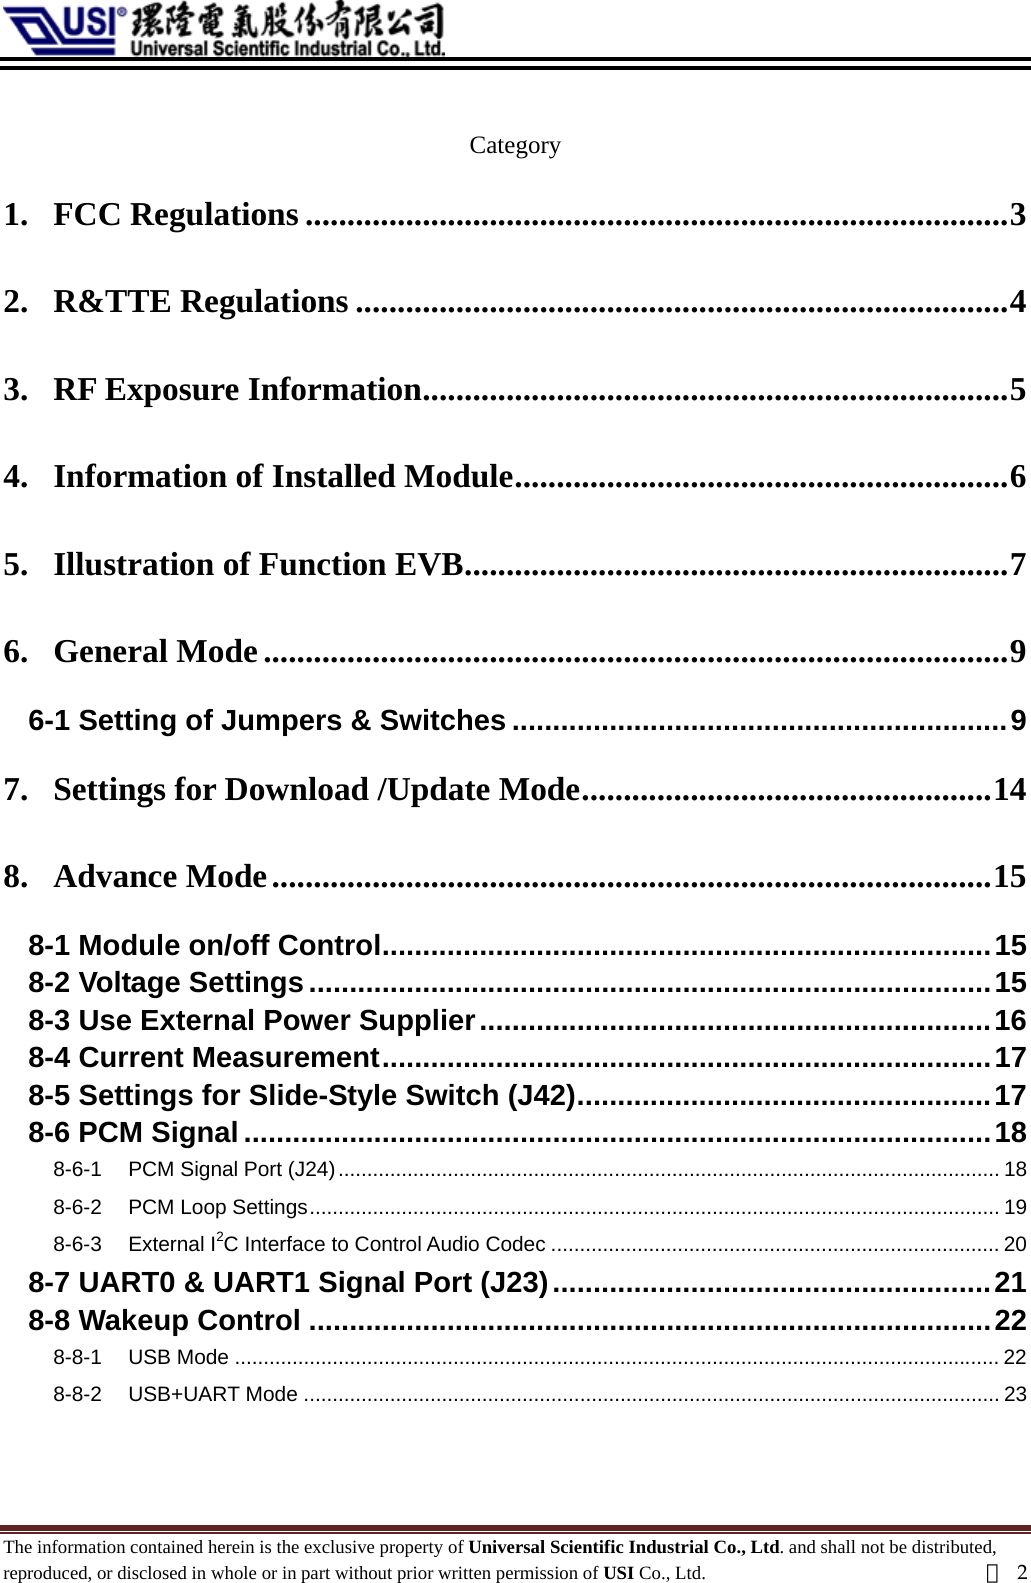   Category 1. FCC Regulations ....................................................................................3 2. R&amp;TTE Regulations ..............................................................................4 3. RF Exposure Information......................................................................5 4. Information of Installed Module...........................................................6 5. Illustration of Function EVB.................................................................7 6. General Mode.........................................................................................9 6-1 Setting of Jumpers &amp; Switches .............................................................9 7. Settings for Download /Update Mode.................................................14 8. Advance Mode......................................................................................15 8-1 Module on/off Control...........................................................................15 8-2 Voltage Settings....................................................................................15 8-3 Use External Power Supplier...............................................................16 8-4 Current Measurement...........................................................................17 8-5 Settings for Slide-Style Switch (J42)...................................................17 8-6 PCM Signal ............................................................................................18 8-6-1 PCM Signal Port (J24)................................................................................................................... 18 8-6-2 PCM Loop Settings........................................................................................................................ 19 8-6-3 External I2C Interface to Control Audio Codec .............................................................................. 20 8-7 UART0 &amp; UART1 Signal Port (J23)......................................................21 8-8 Wakeup Control ....................................................................................22 8-8-1 USB Mode ..................................................................................................................................... 22 8-8-2 USB+UART Mode ......................................................................................................................... 23 The information contained herein is the exclusive property of Universal Scientific Industrial Co., Ltd. and shall not be distributed, reproduced, or disclosed in whole or in part without prior written permission of USI Co., Ltd.  頁2 